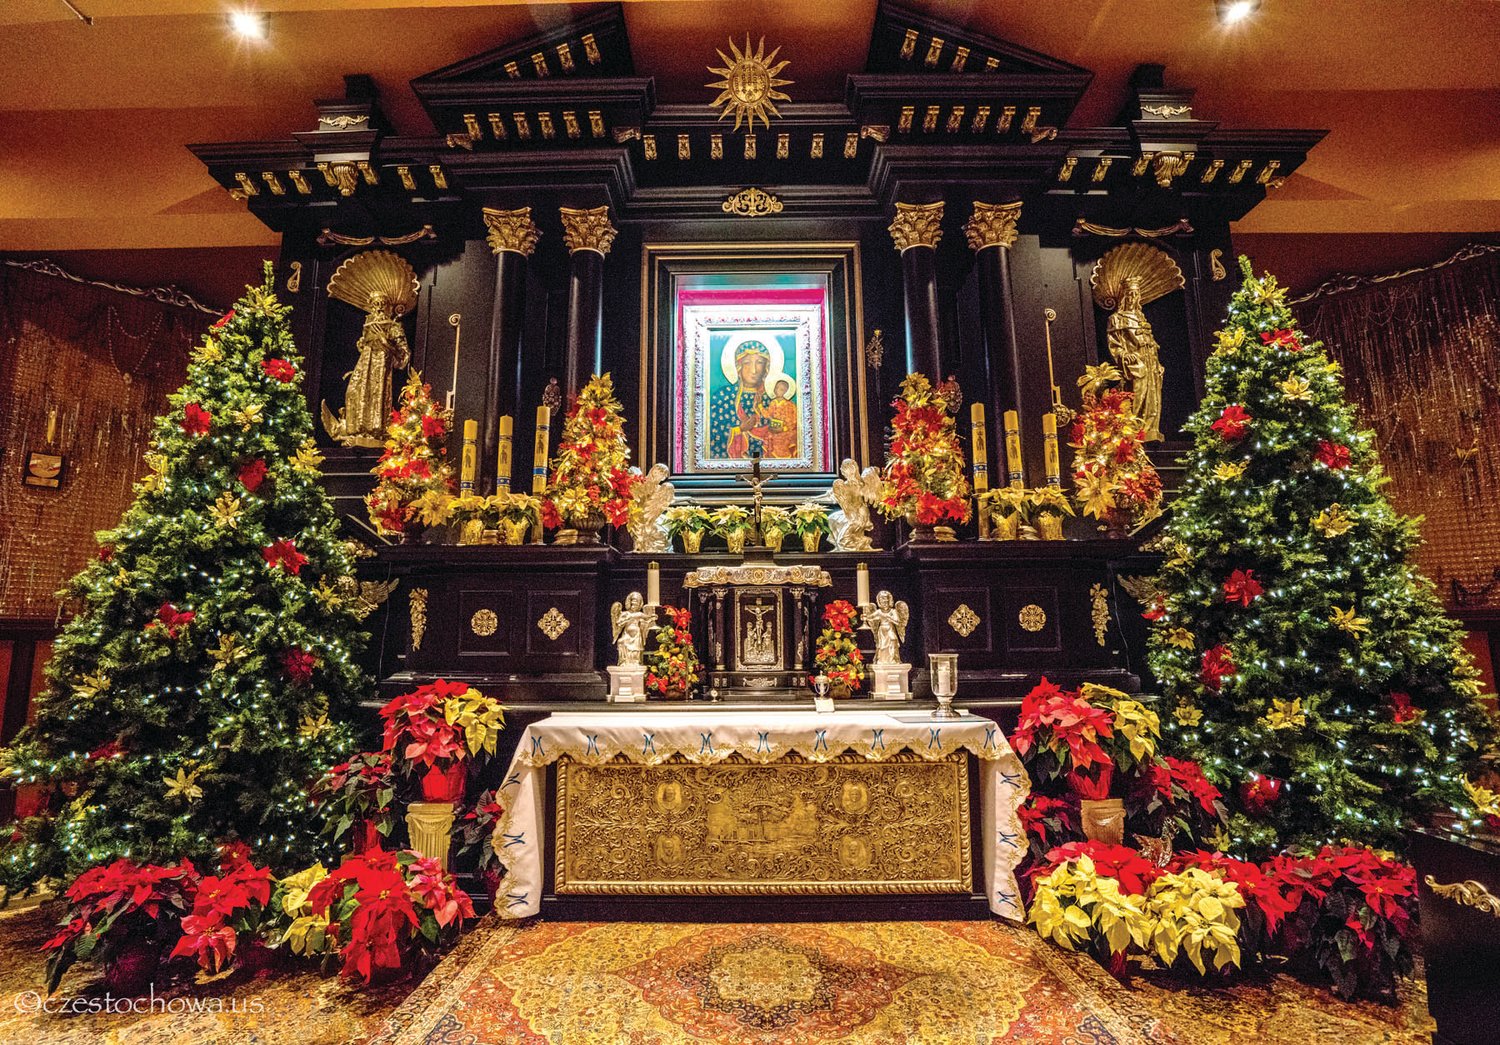 An altar at the National Shrine of Our Lady of Czestochowa is festively decorated for the season. Photographs copyright czestochowa.us